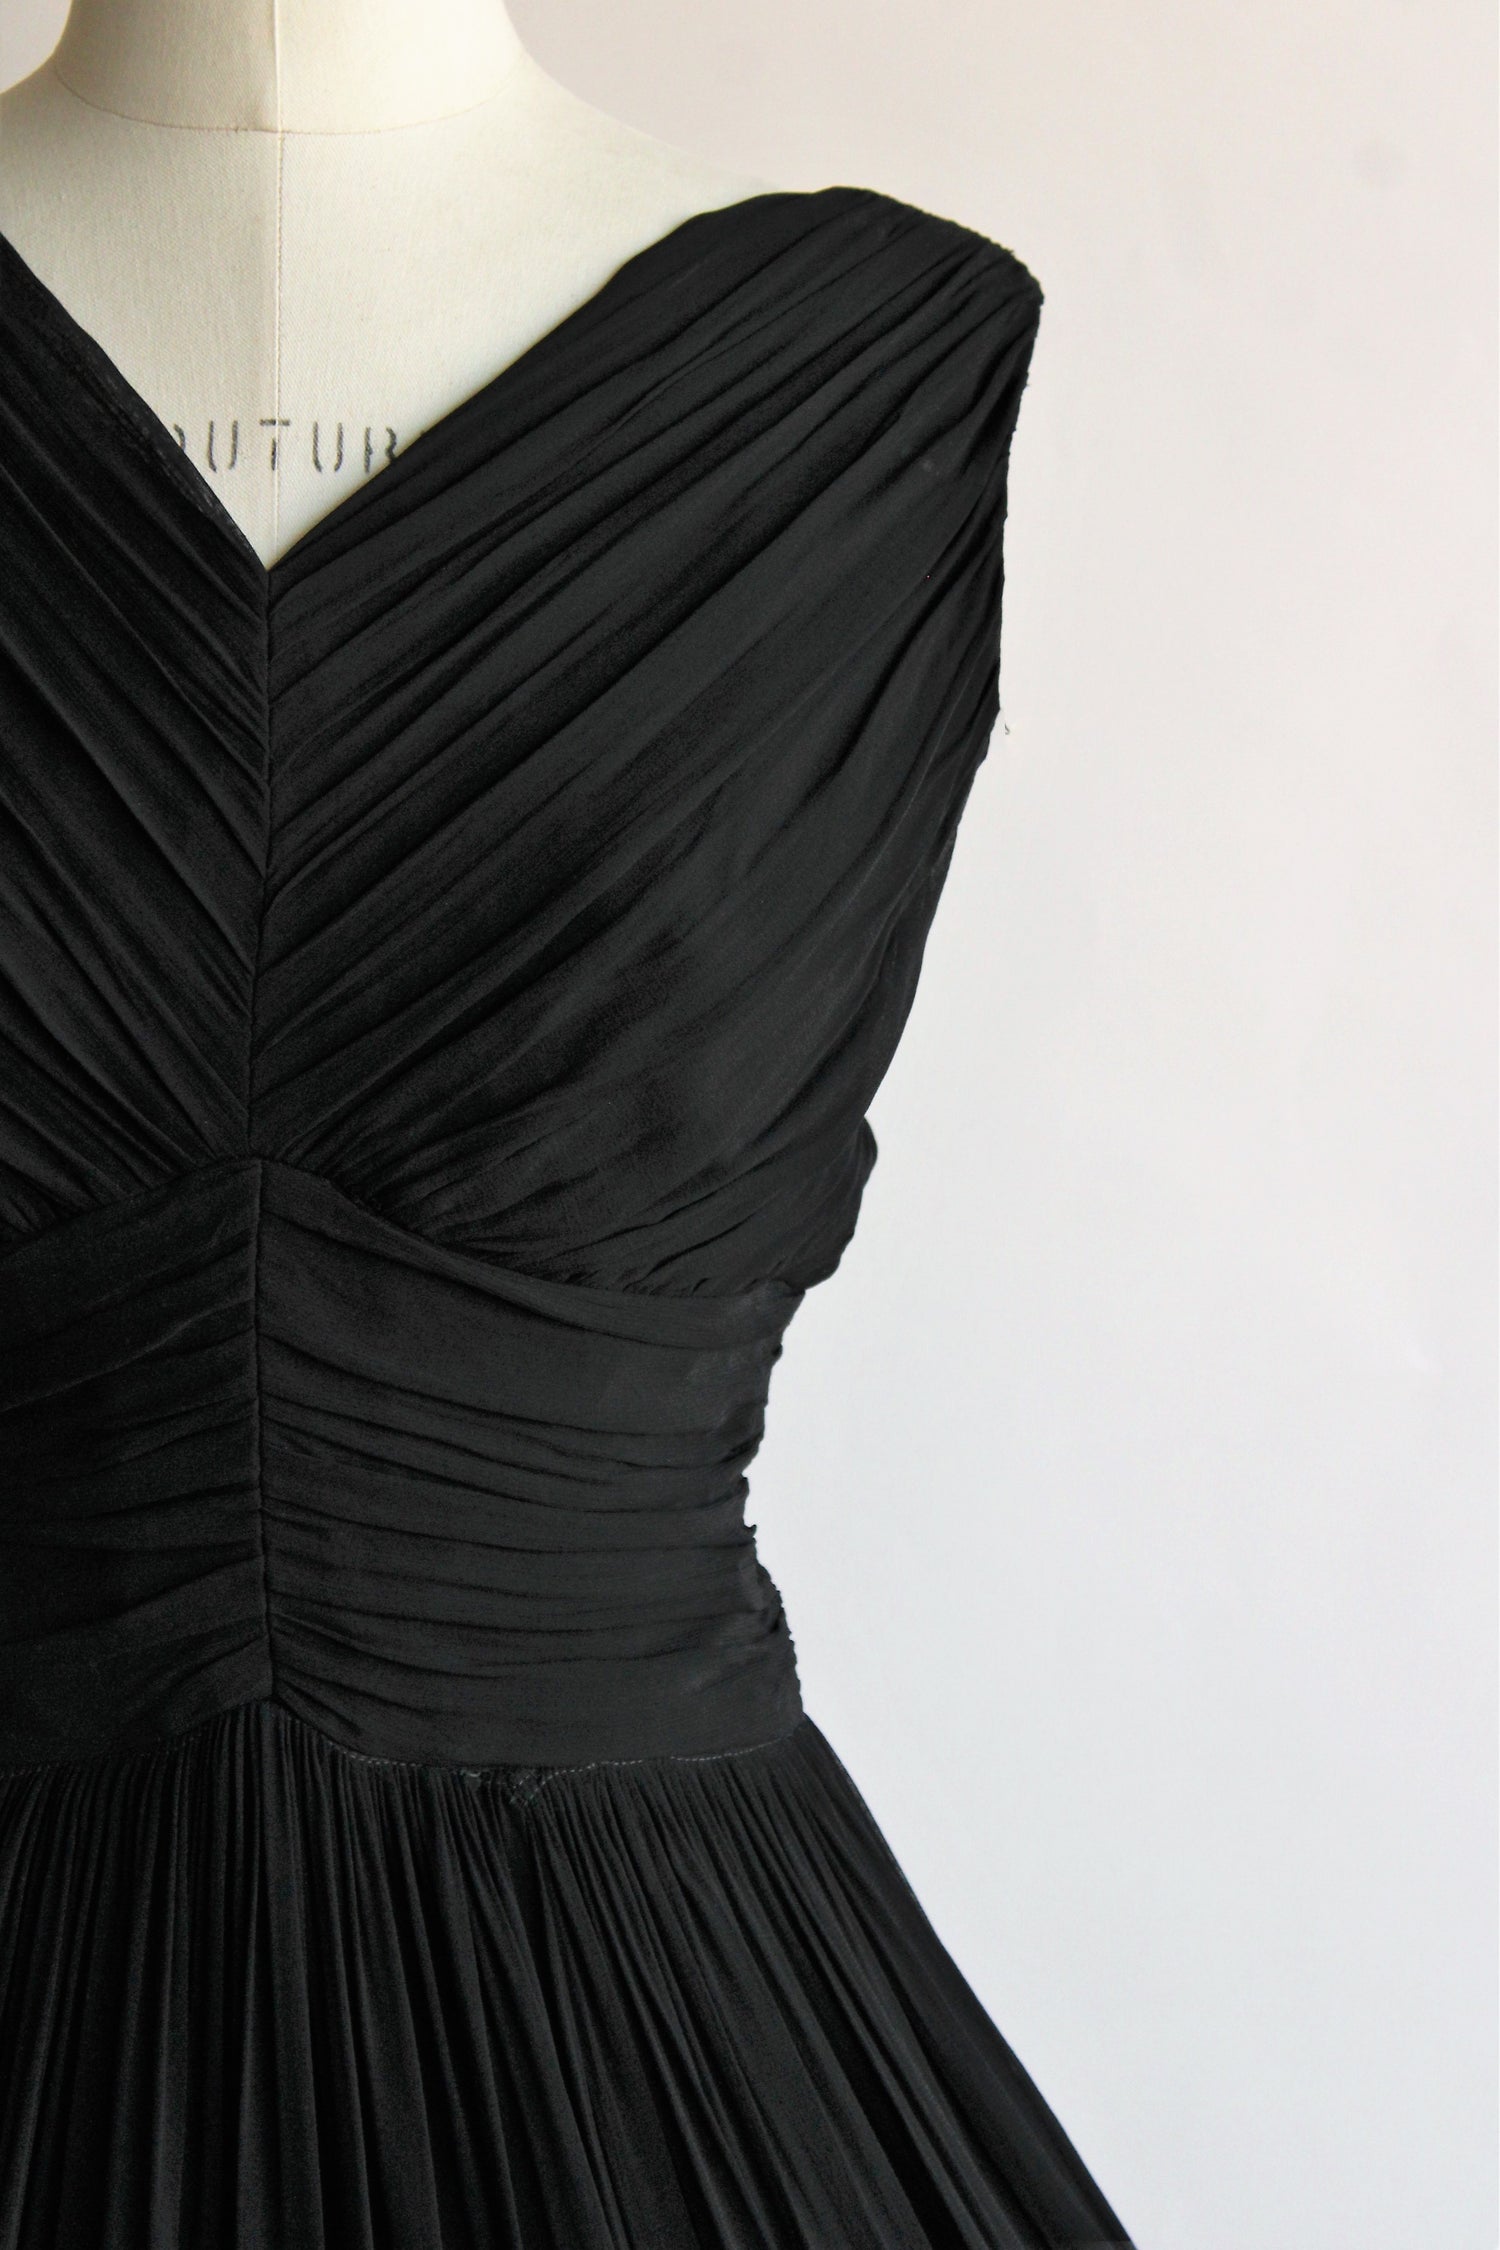 Vintage 1950s Black Pleated Fit and Flare Dress